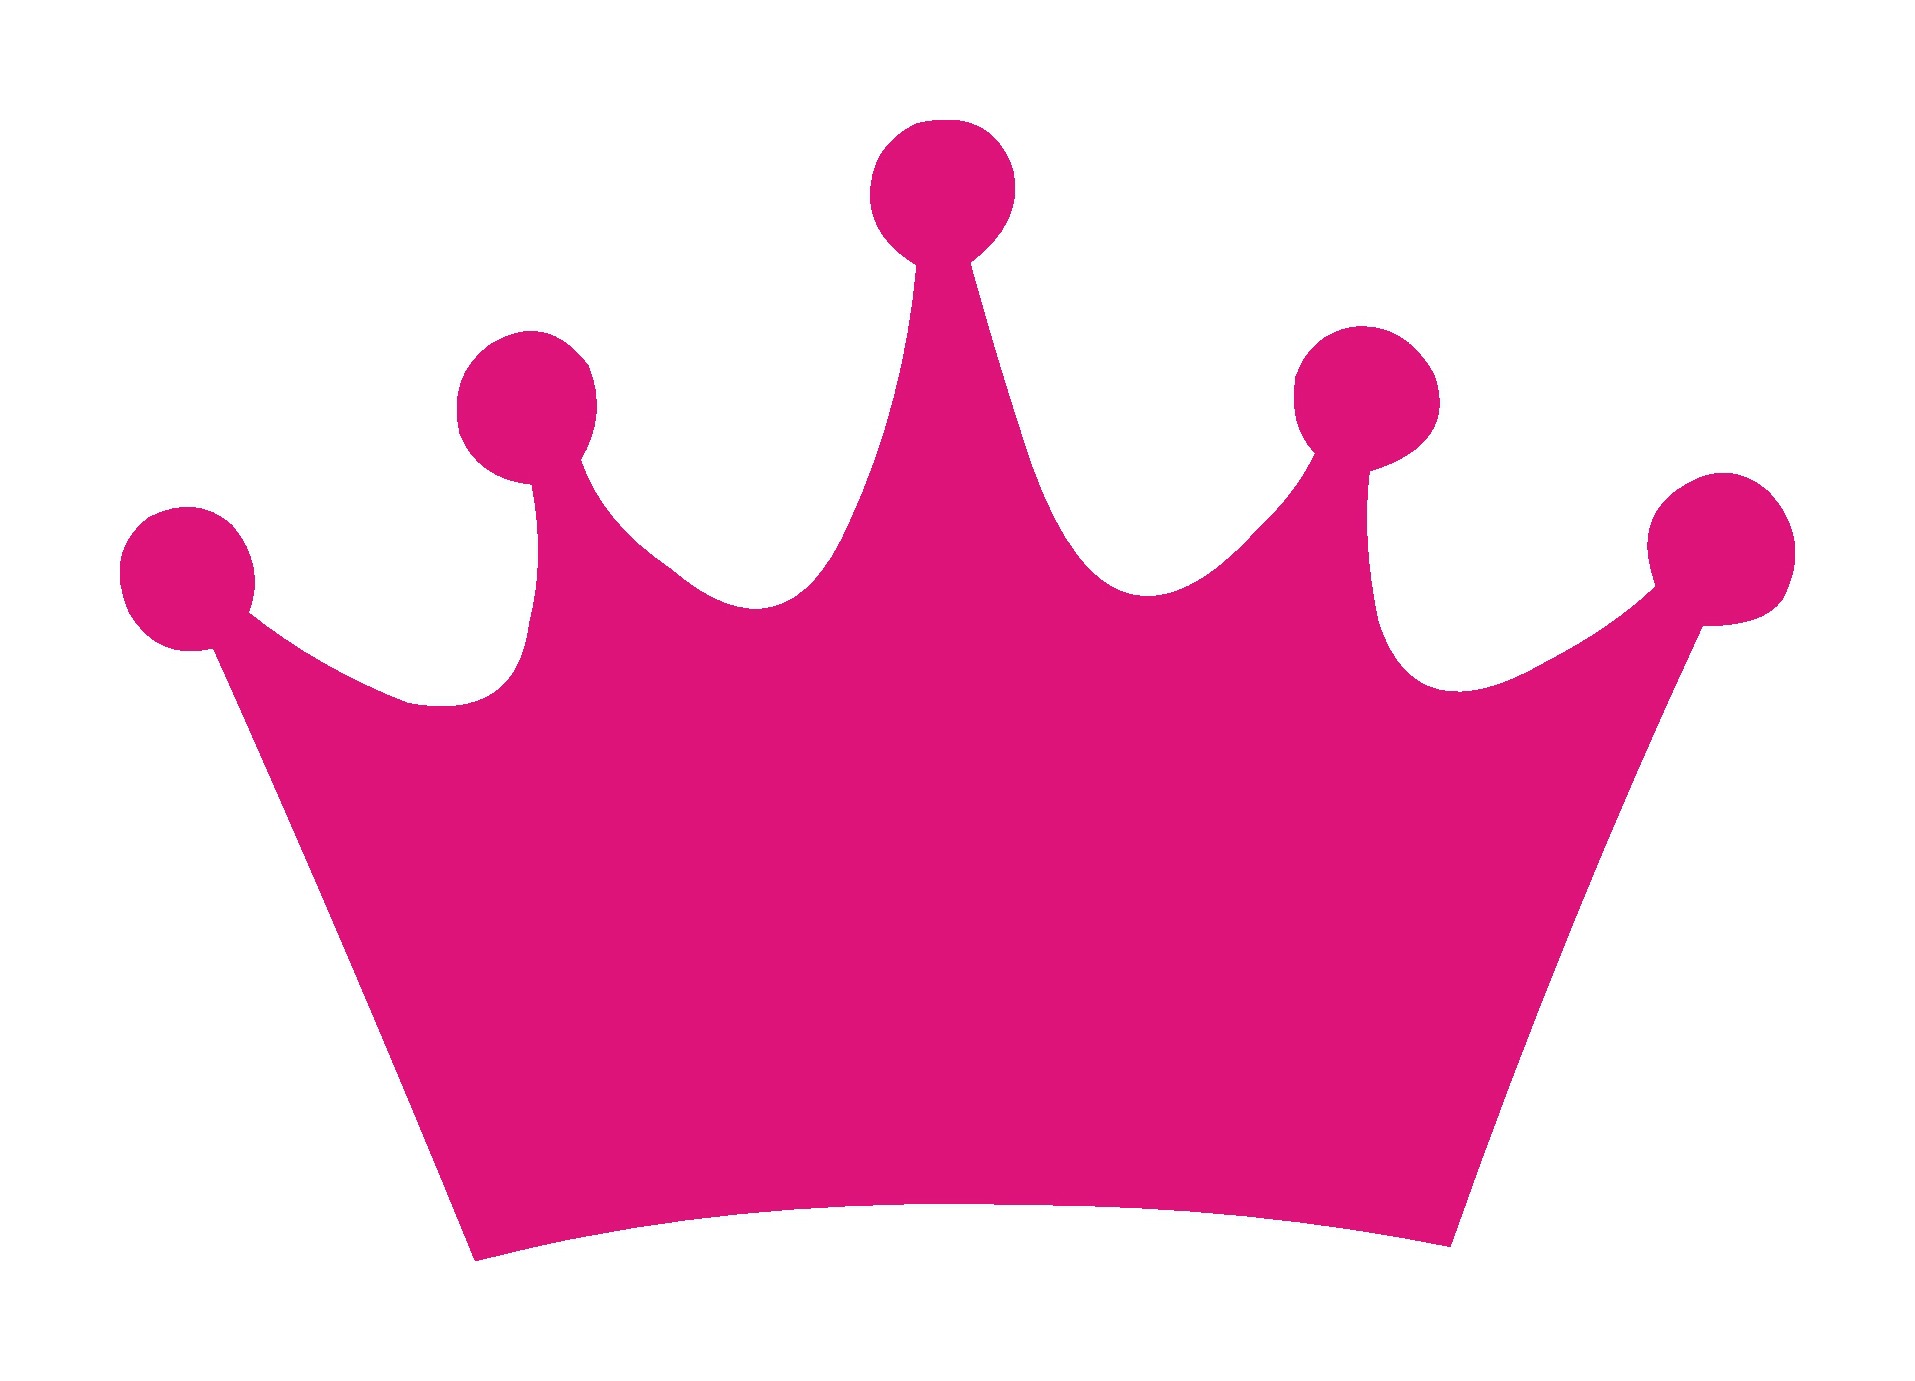 Diamond Crown PNG Clipart Pic